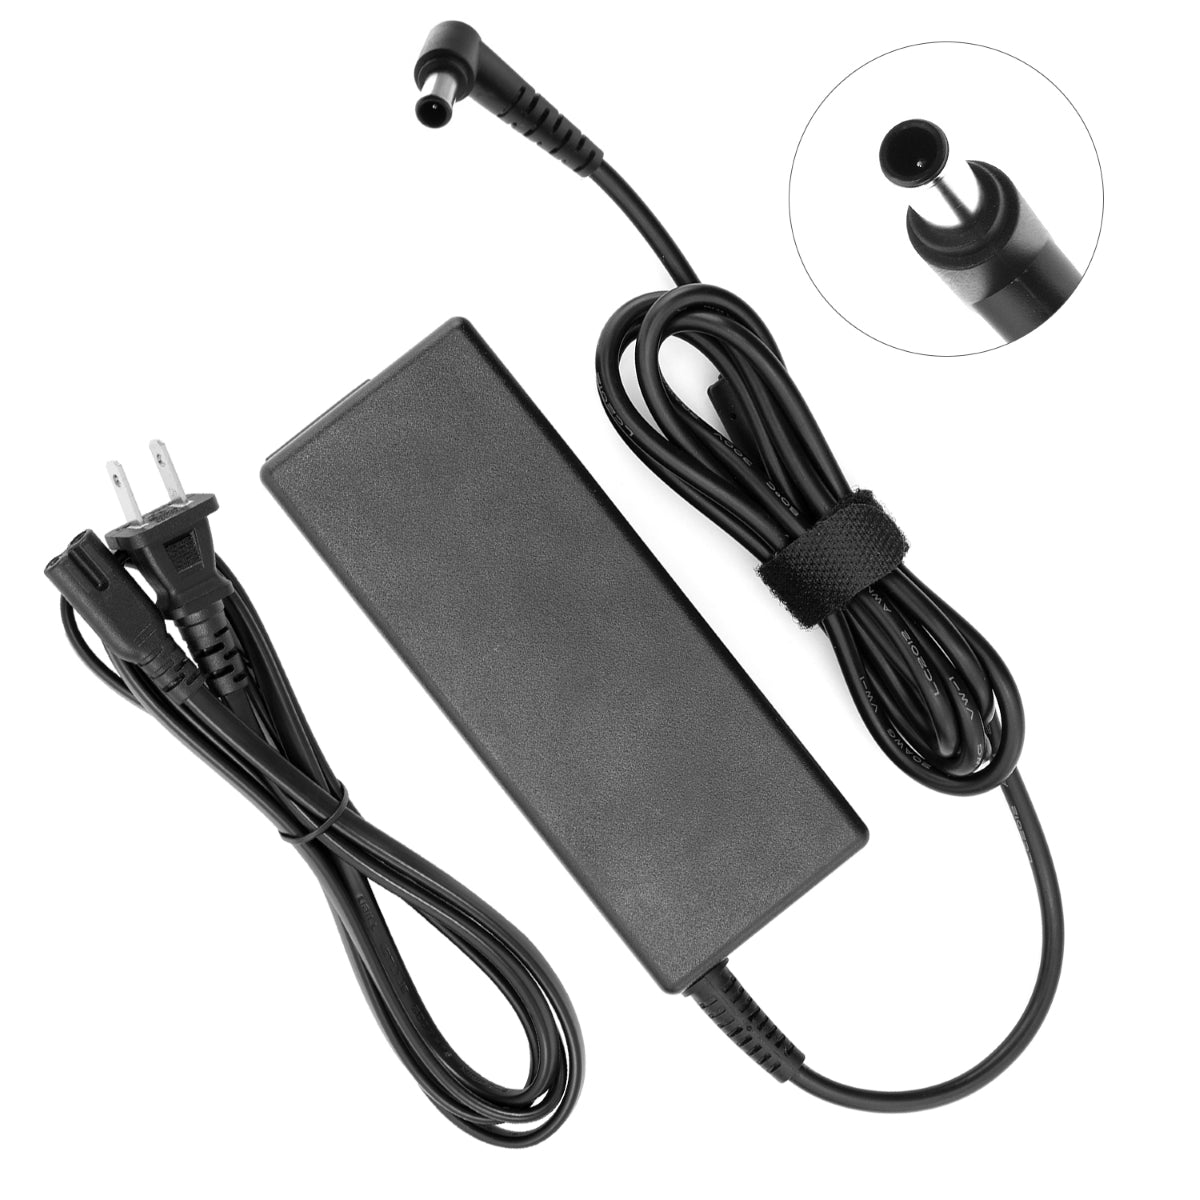 Power Adapter for LG 29LB4510 Monitor TV